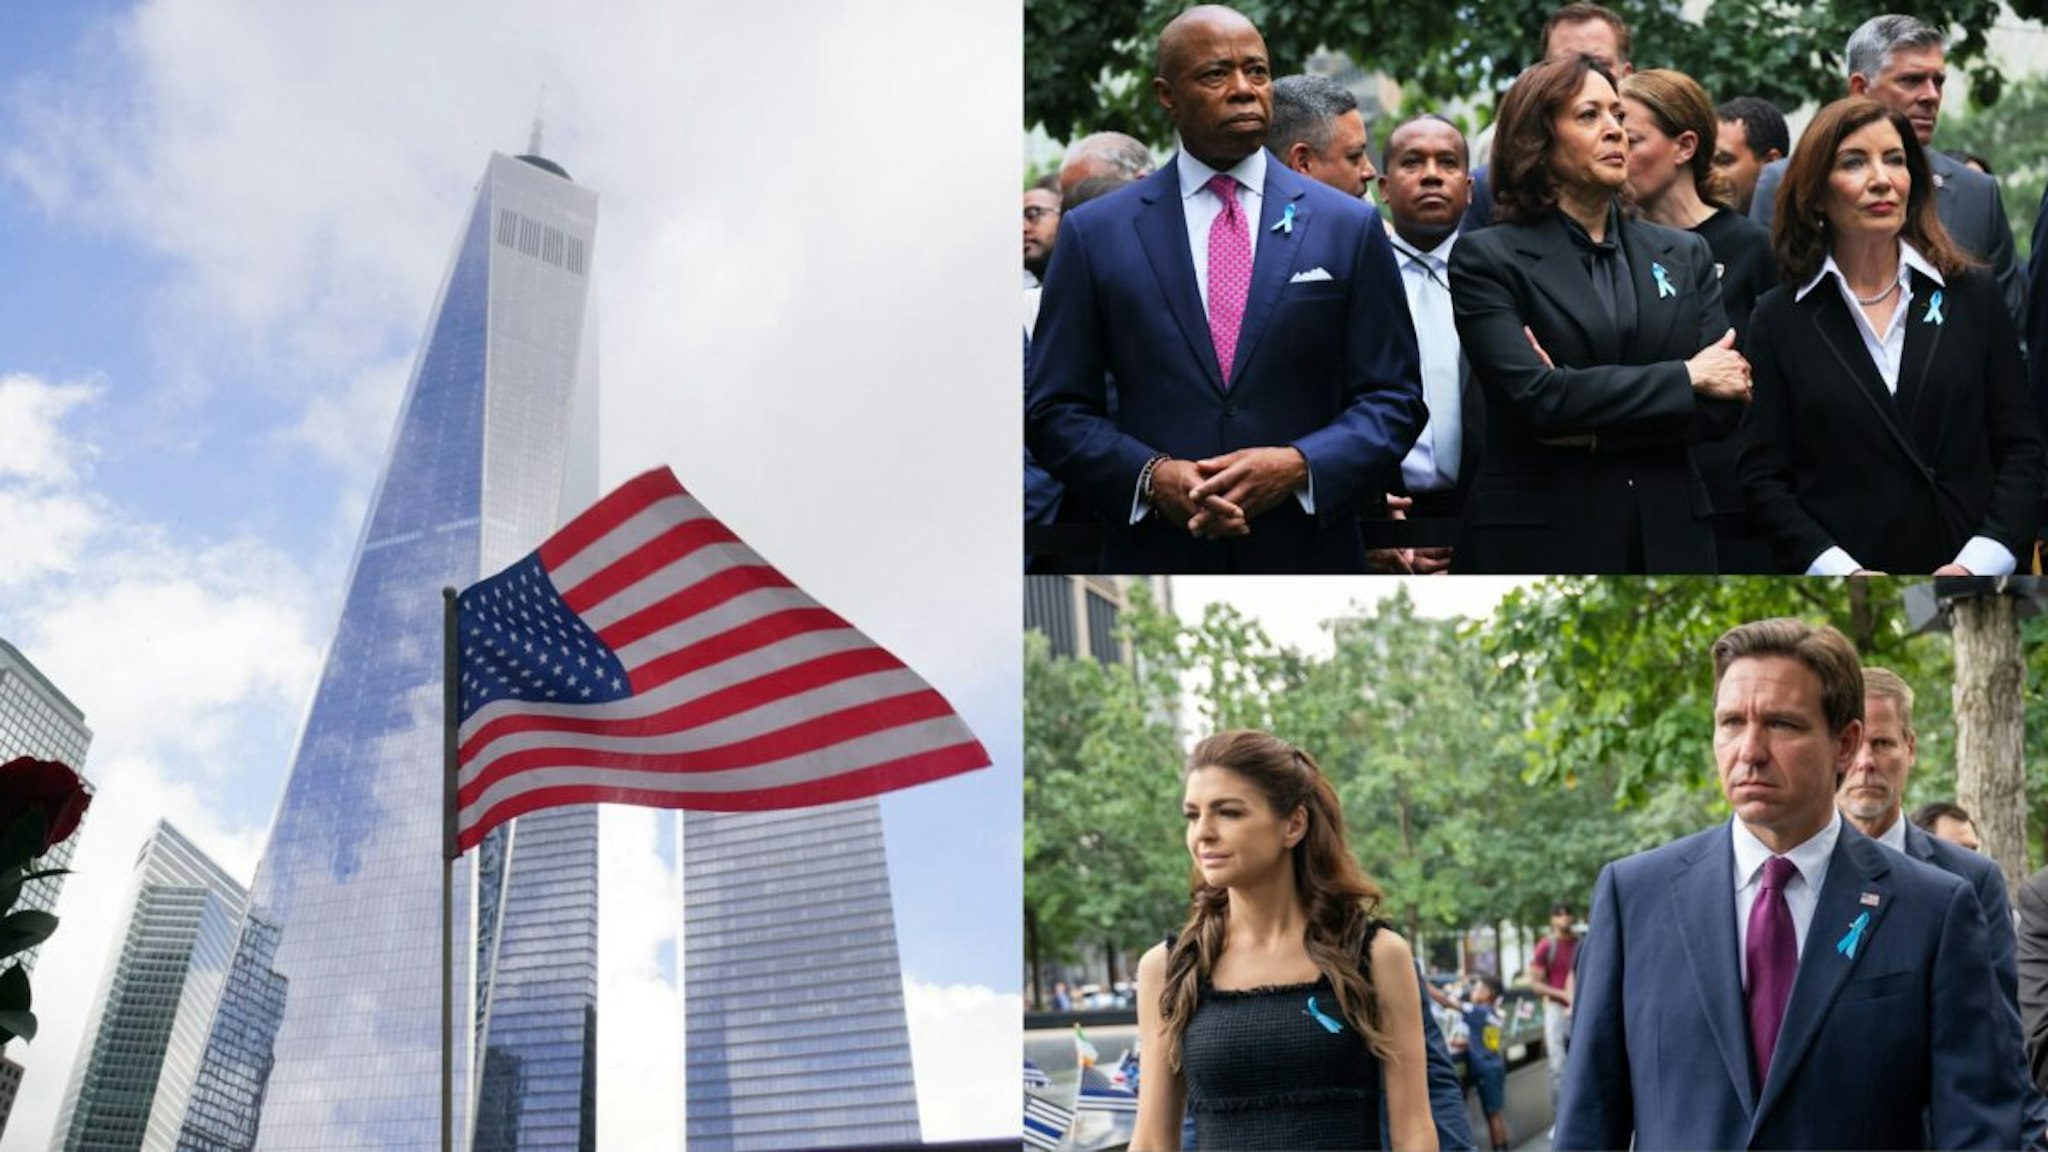 A US flag is seen in front of One World Trade Center on the 22nd anniversary of the terror attack on the World Trade Center, in New York City on September 11, 2023./New York Mayor Eric Adams, Vice President Kamala Harris, and New York Gov. Kathy Hochul attend the annual 9/11 Commemoration Ceremony at the National 9/11 Memorial and Museum on September 11, 2023 in New York City./ Florida Governor Ron DeSantis and his wife Casey attend services at the 9/11 Memorial and Museum at the Ground Zero site in lower Manhattan as the nation commemorates the 22nd anniversary of the attacks on September 11, 2023 in New York City.